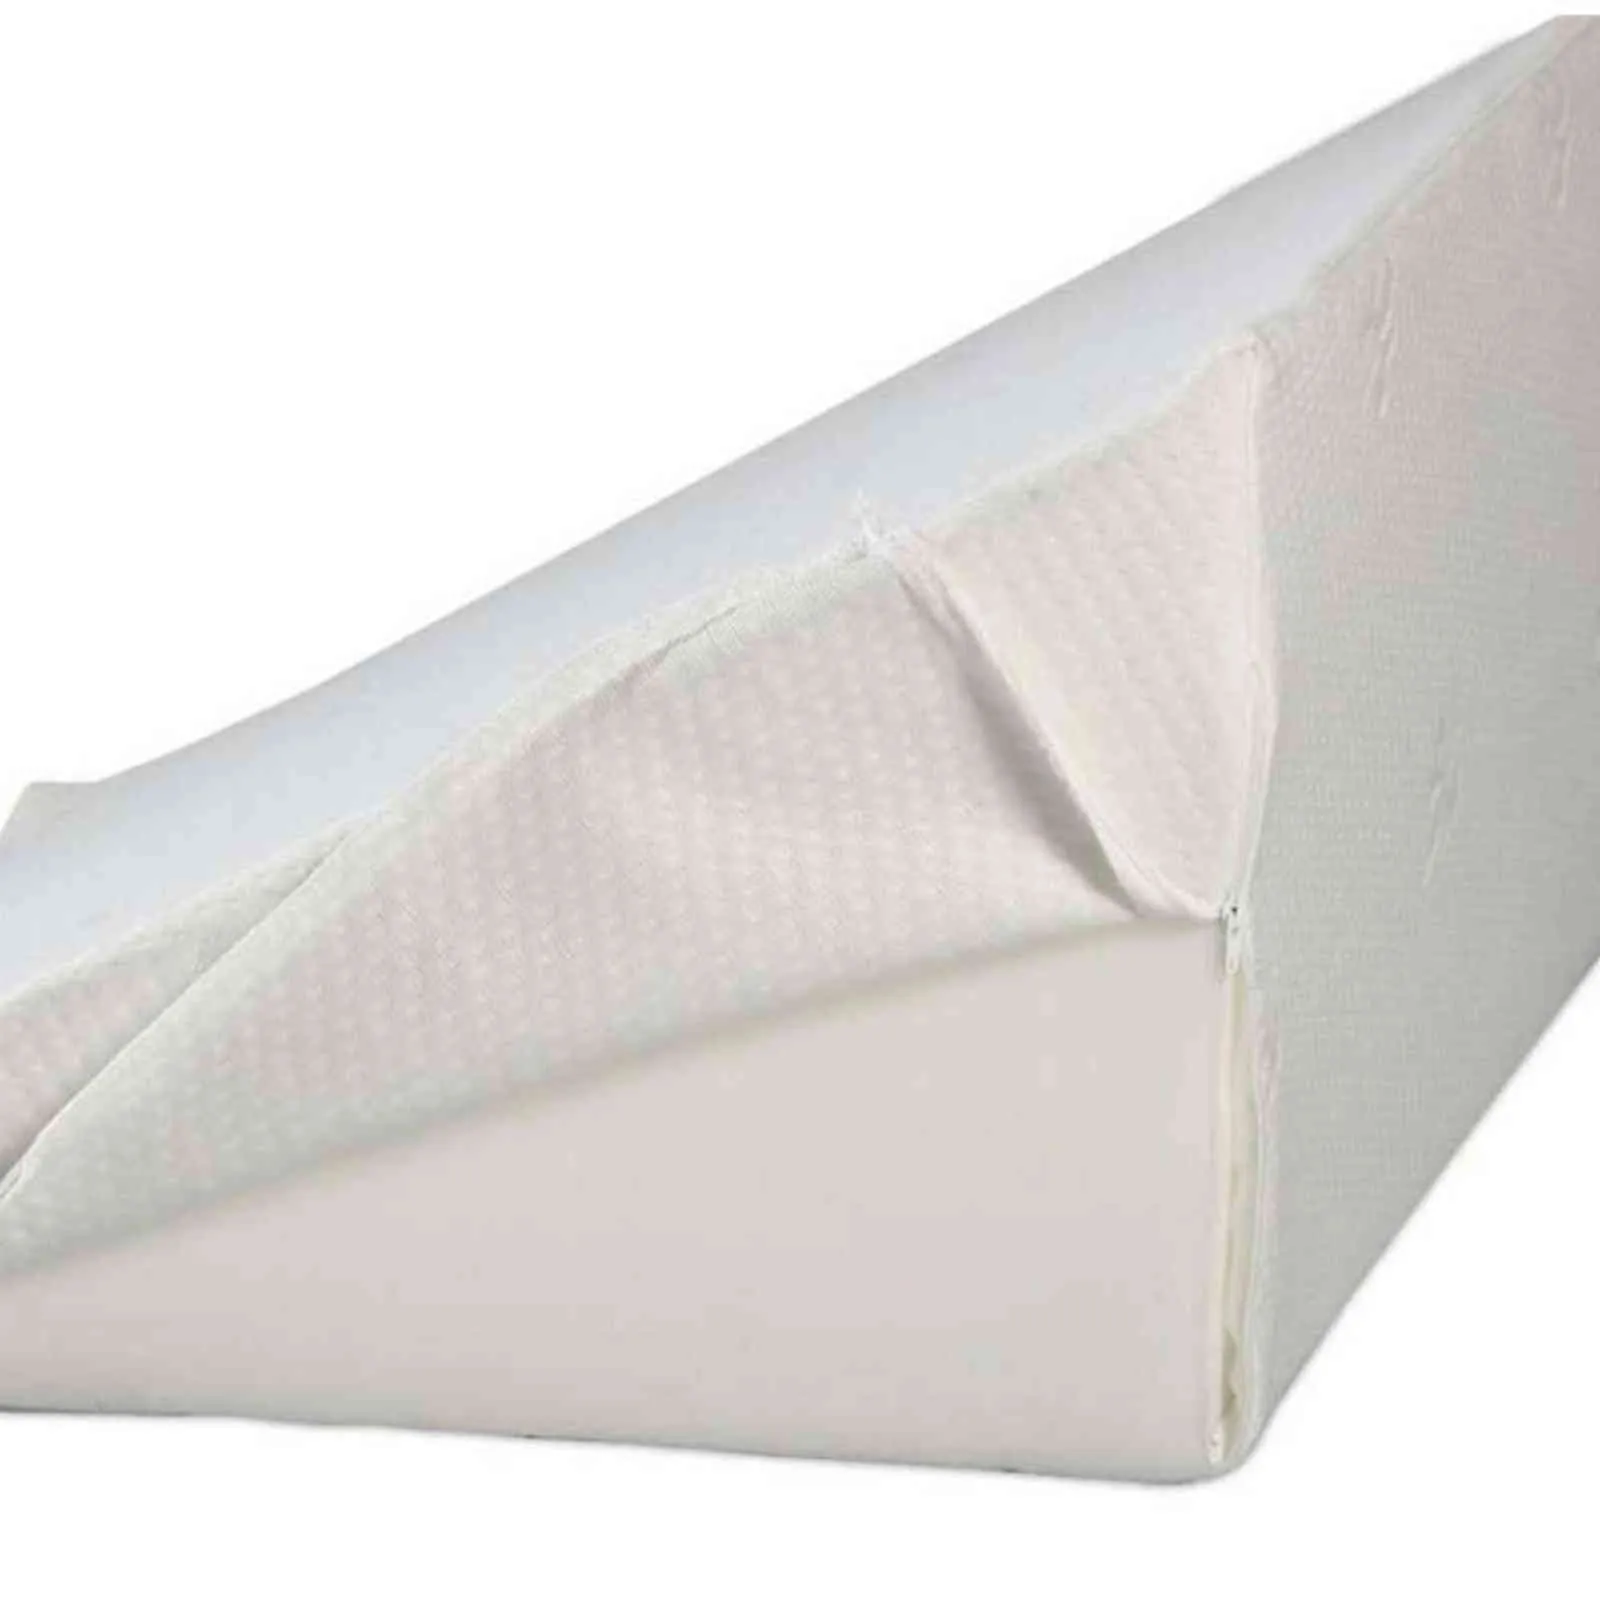 Wedge Bed Pillow Helps with Sleep & Acid Reflux Elevated Supportive Cushion Removable PillowcaseLeg Pillow 211110